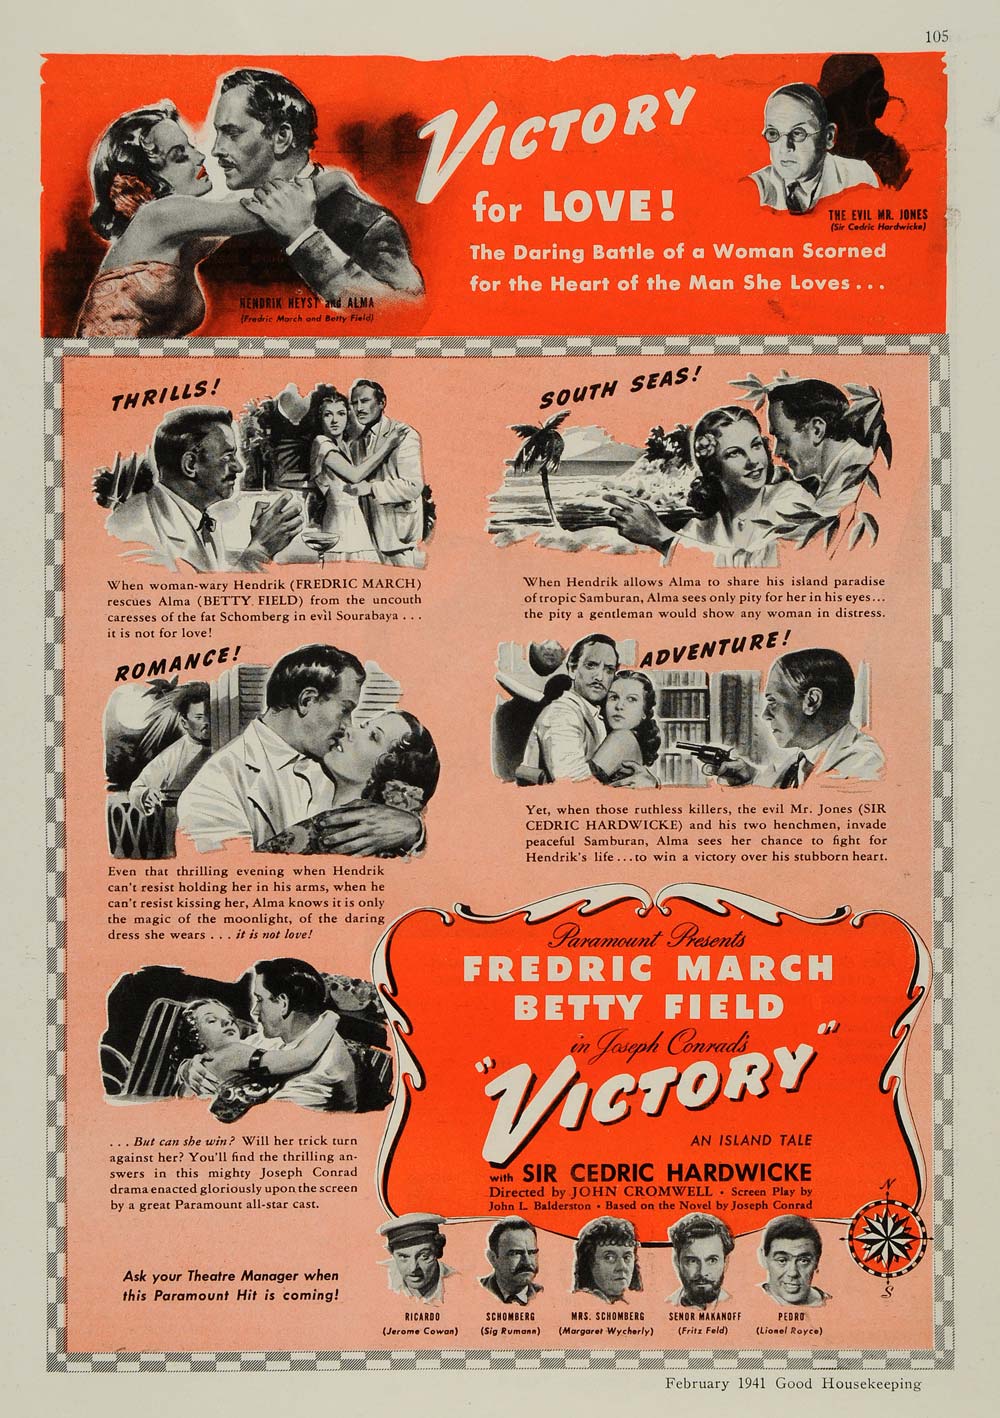 1941 Ad Paramount Victory Betty Field Frederic March - ORIGINAL ADVERTISING GH4